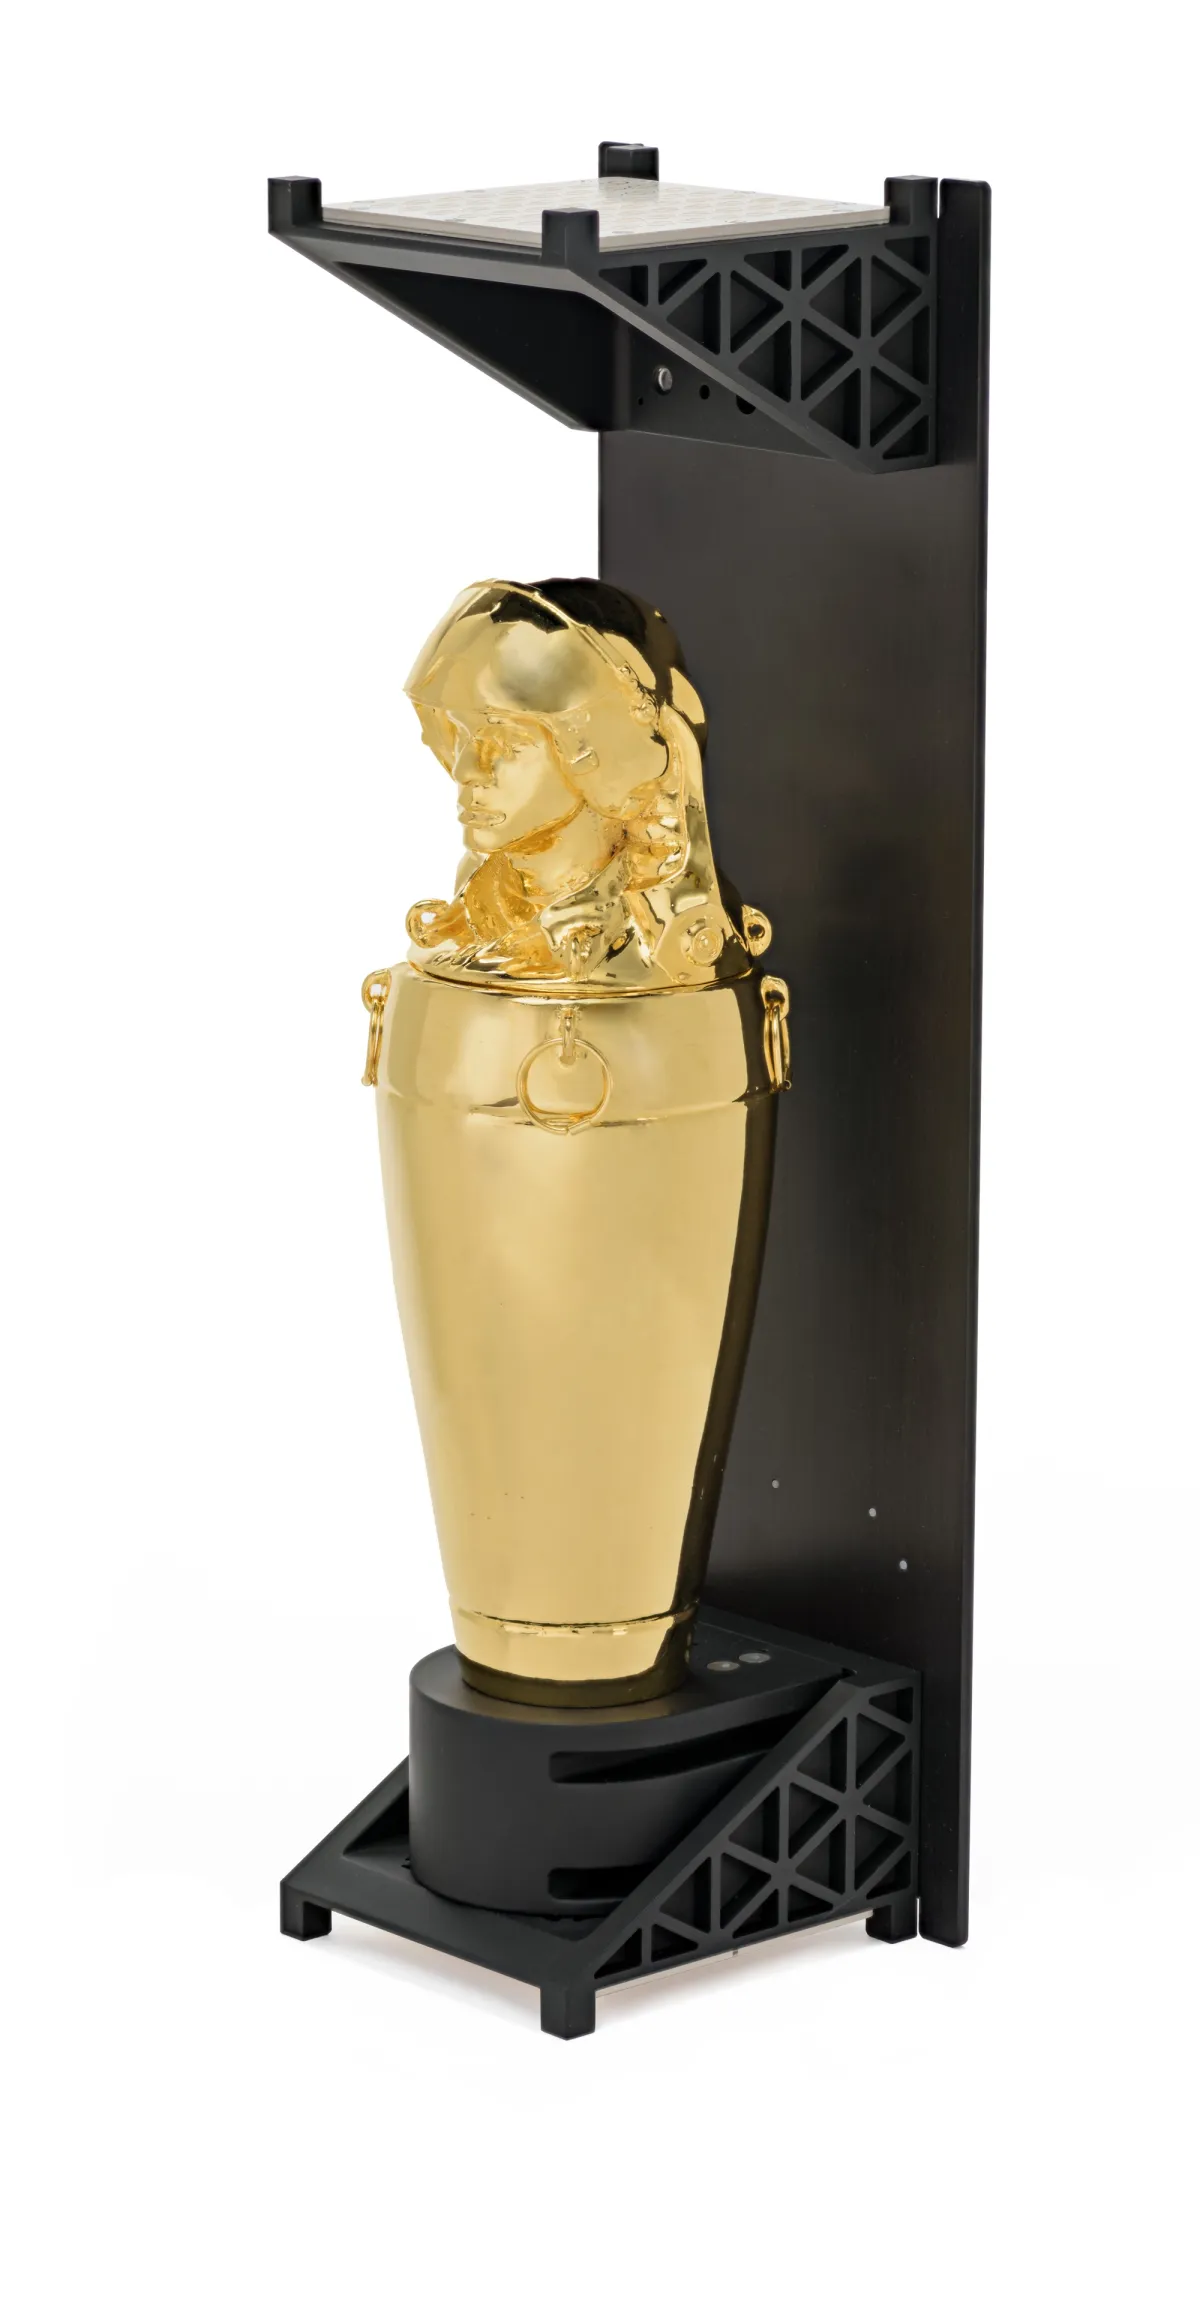 A gold statue is housed within a black display unit. It is in a setting that suggests a professional lab or gallery environment.